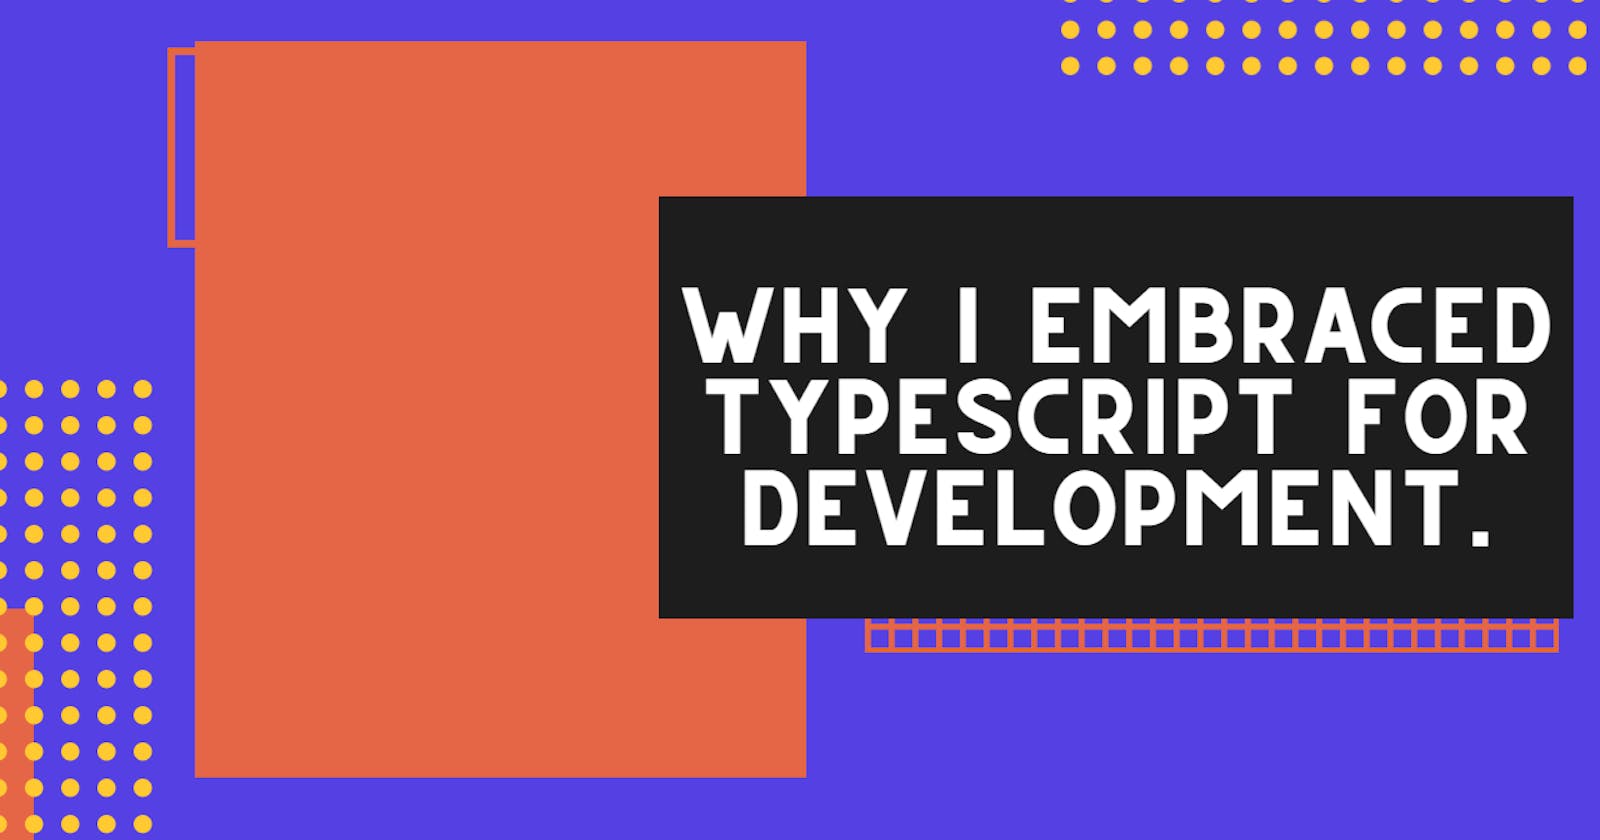 Why I embraced Typescript for development.